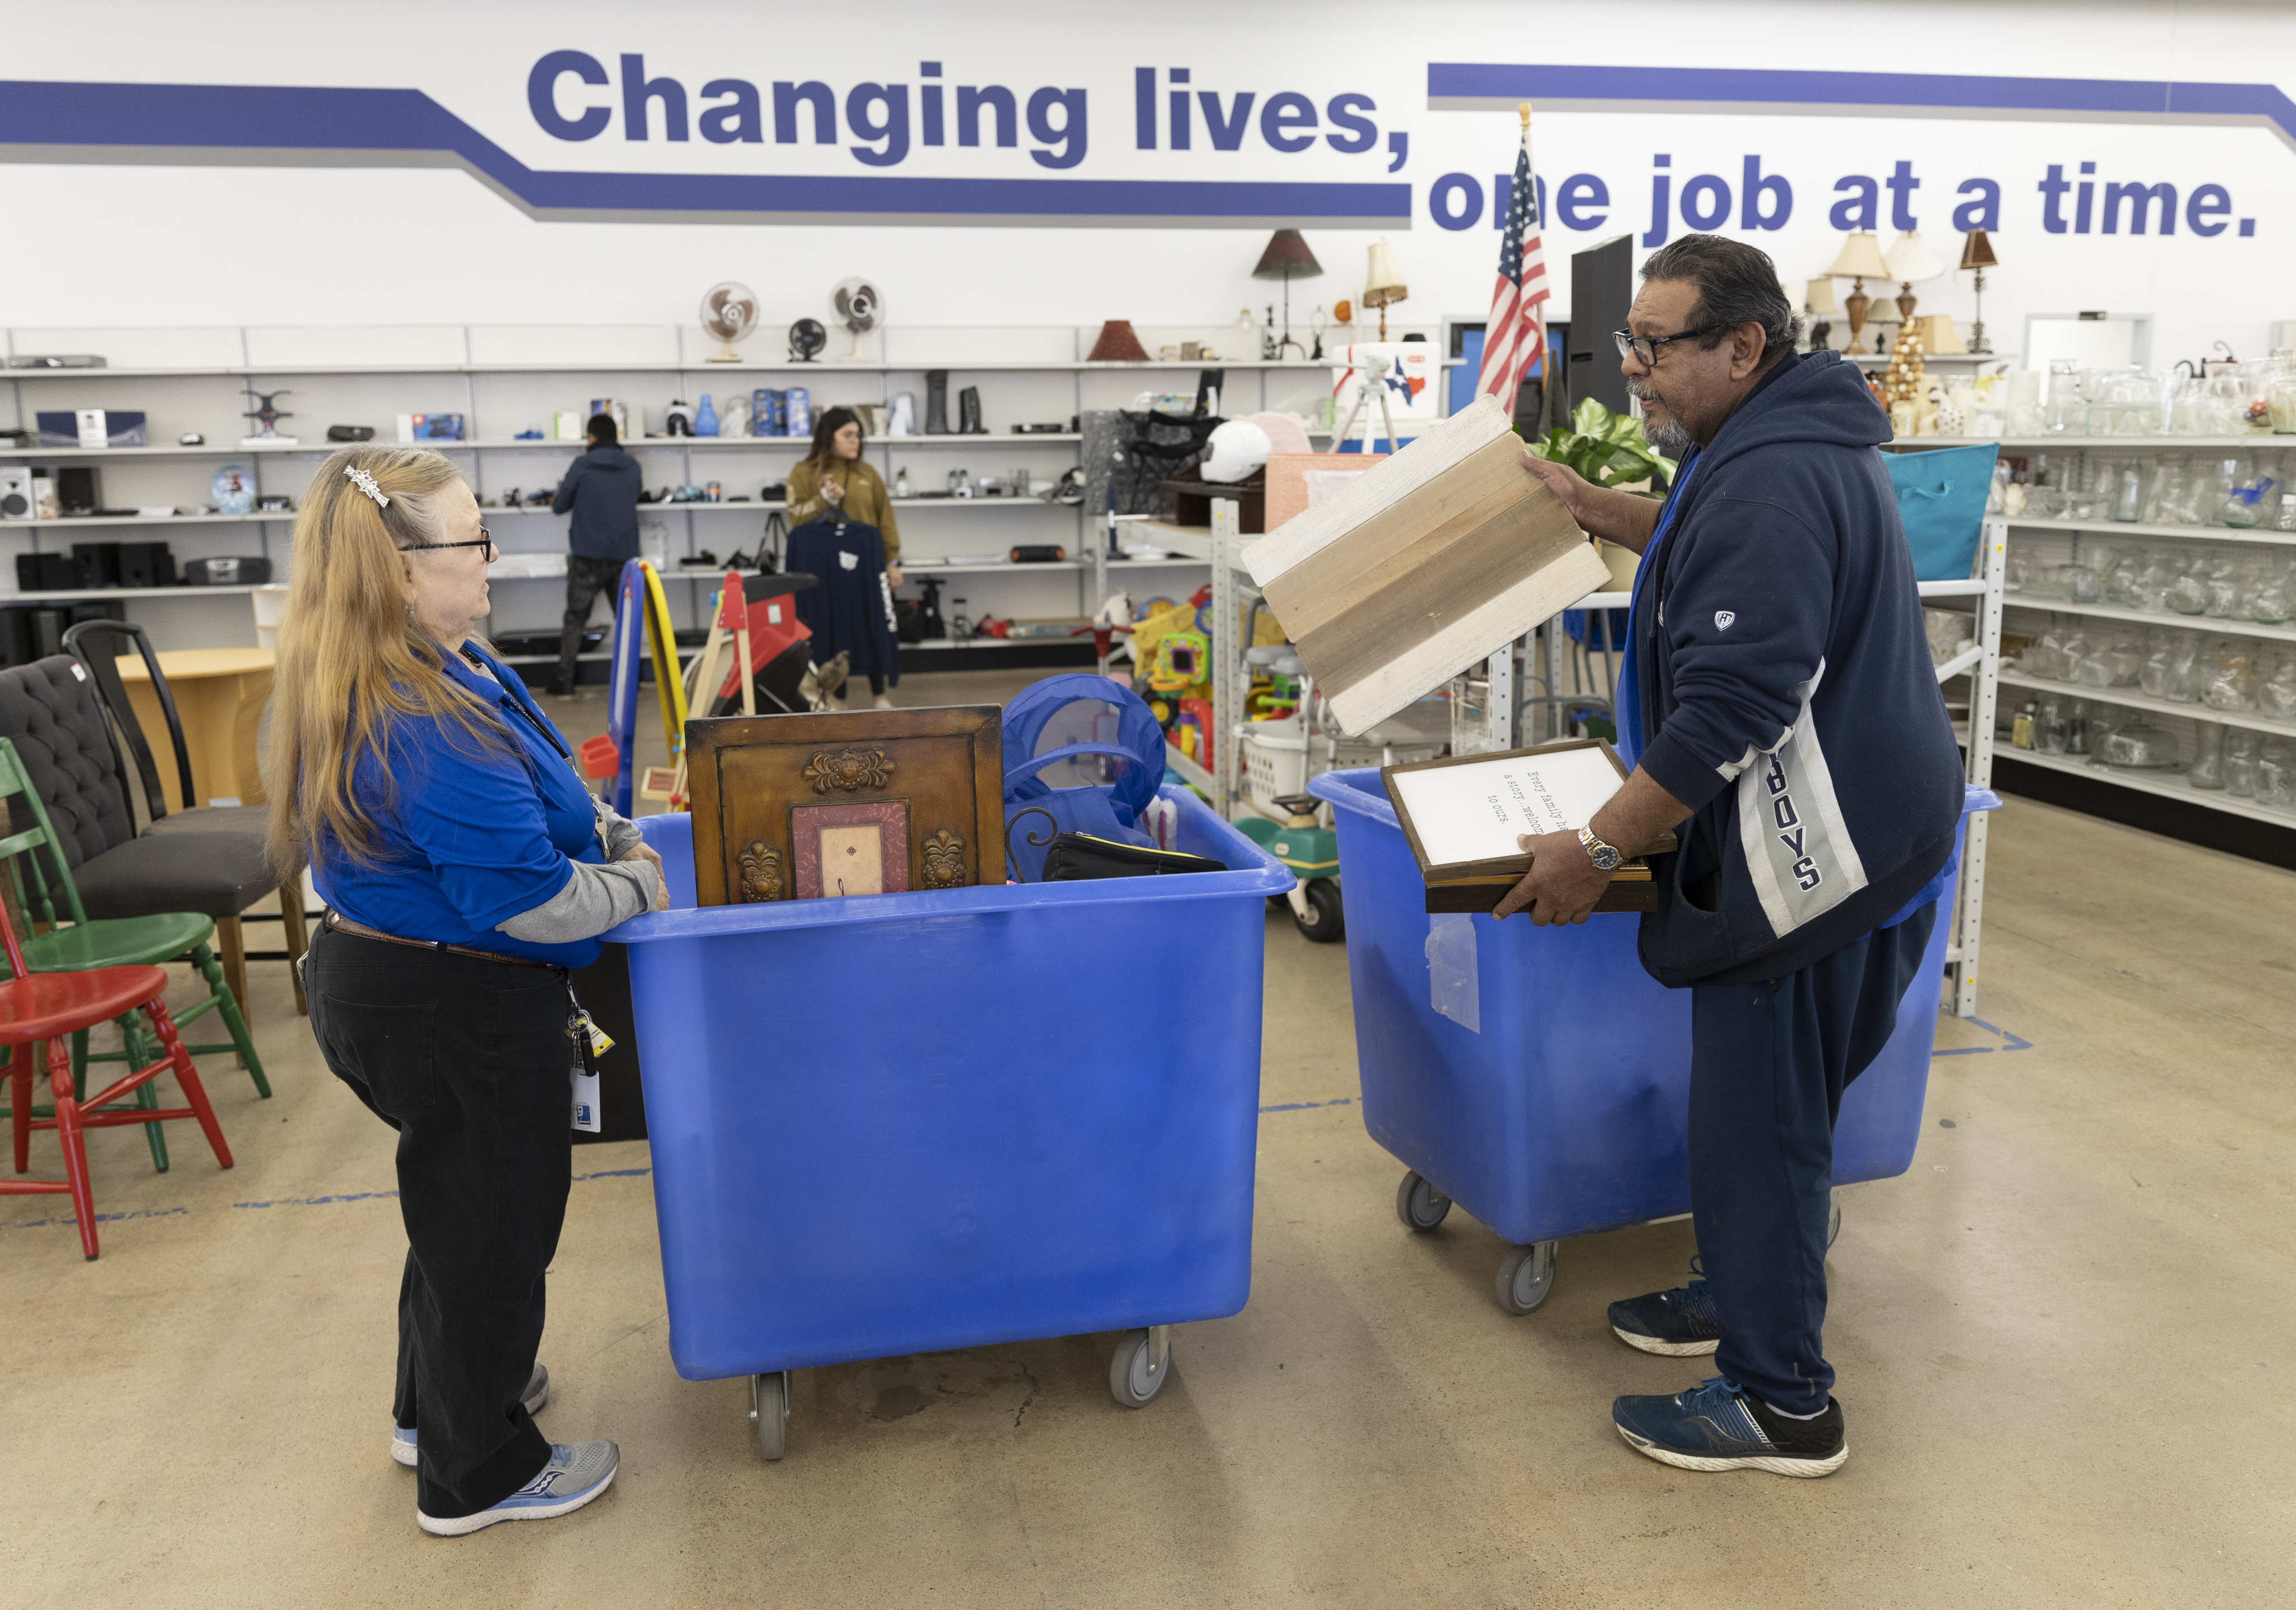 Goodwill of the Heartland moves QC mission services offices to NorthPark  Mall